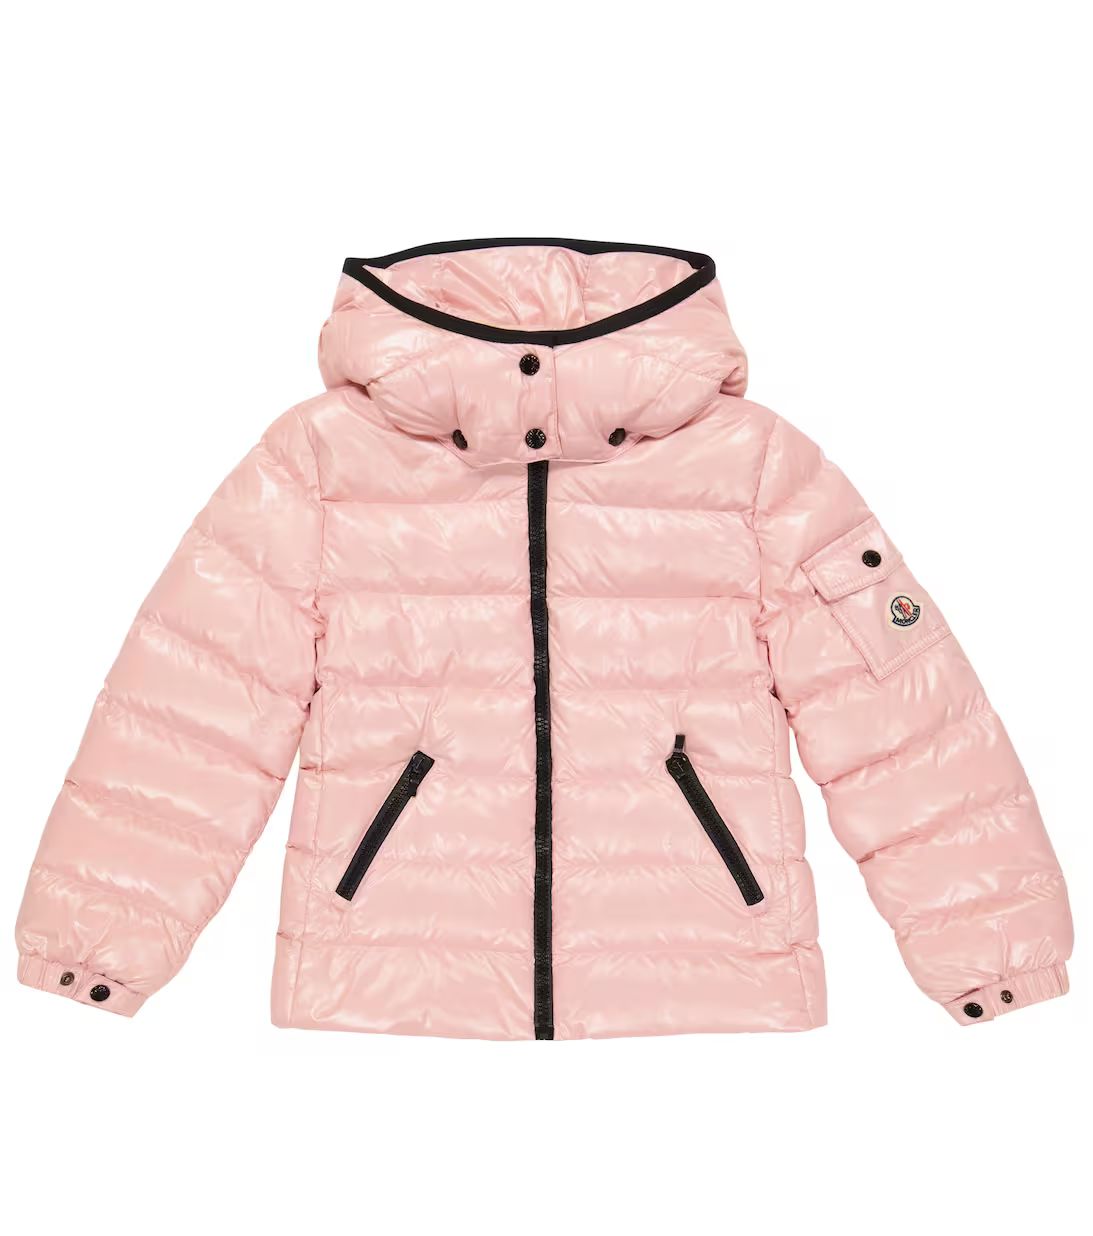 Bady quilted down jacket | Mytheresa (INTL)